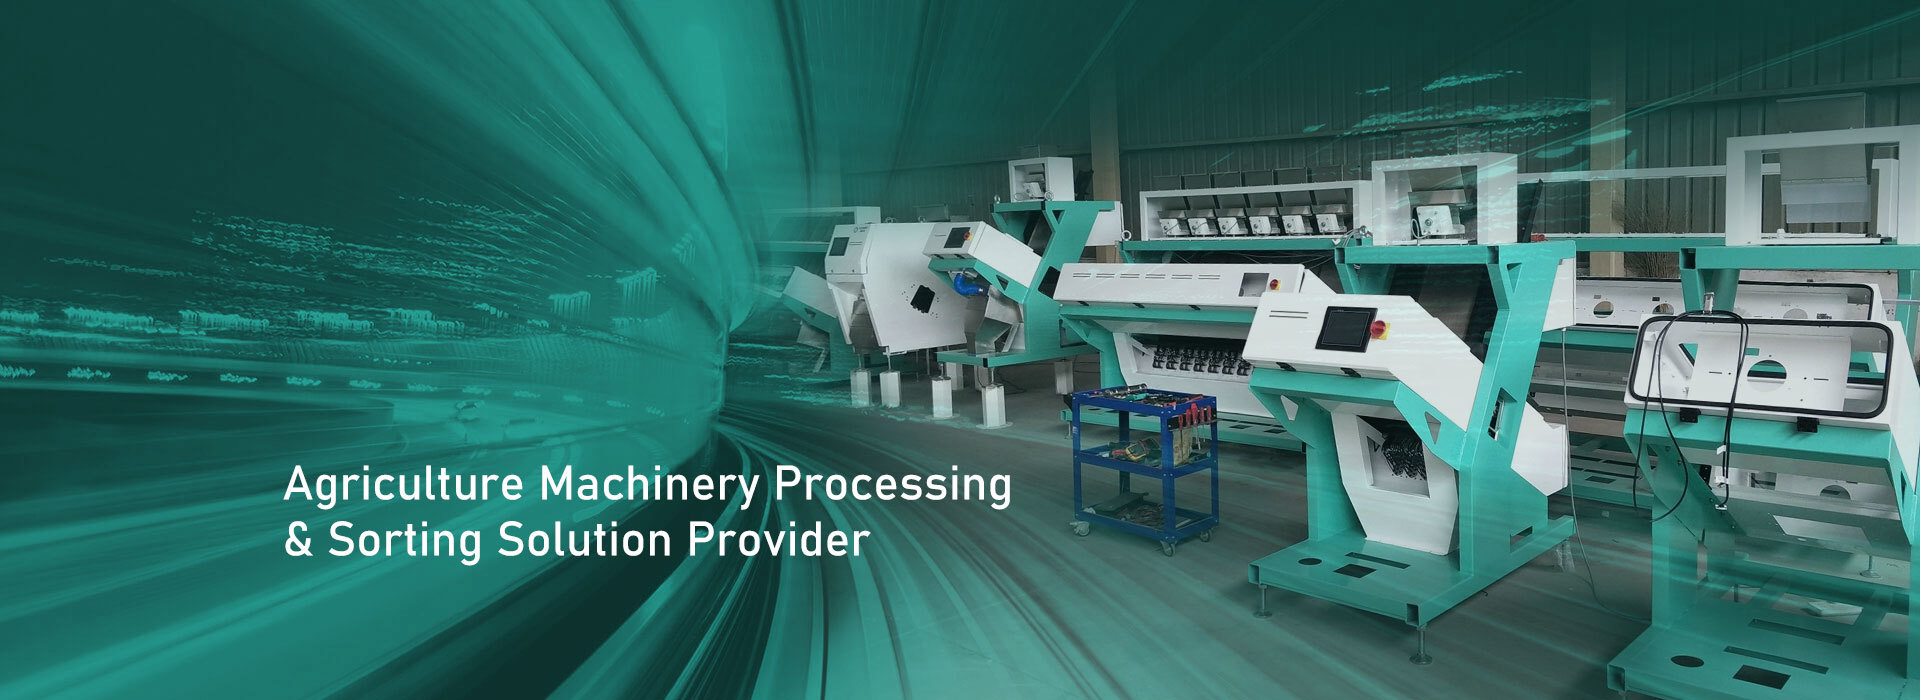 Agriculture Machinery Processing & Sorting Solution Provider